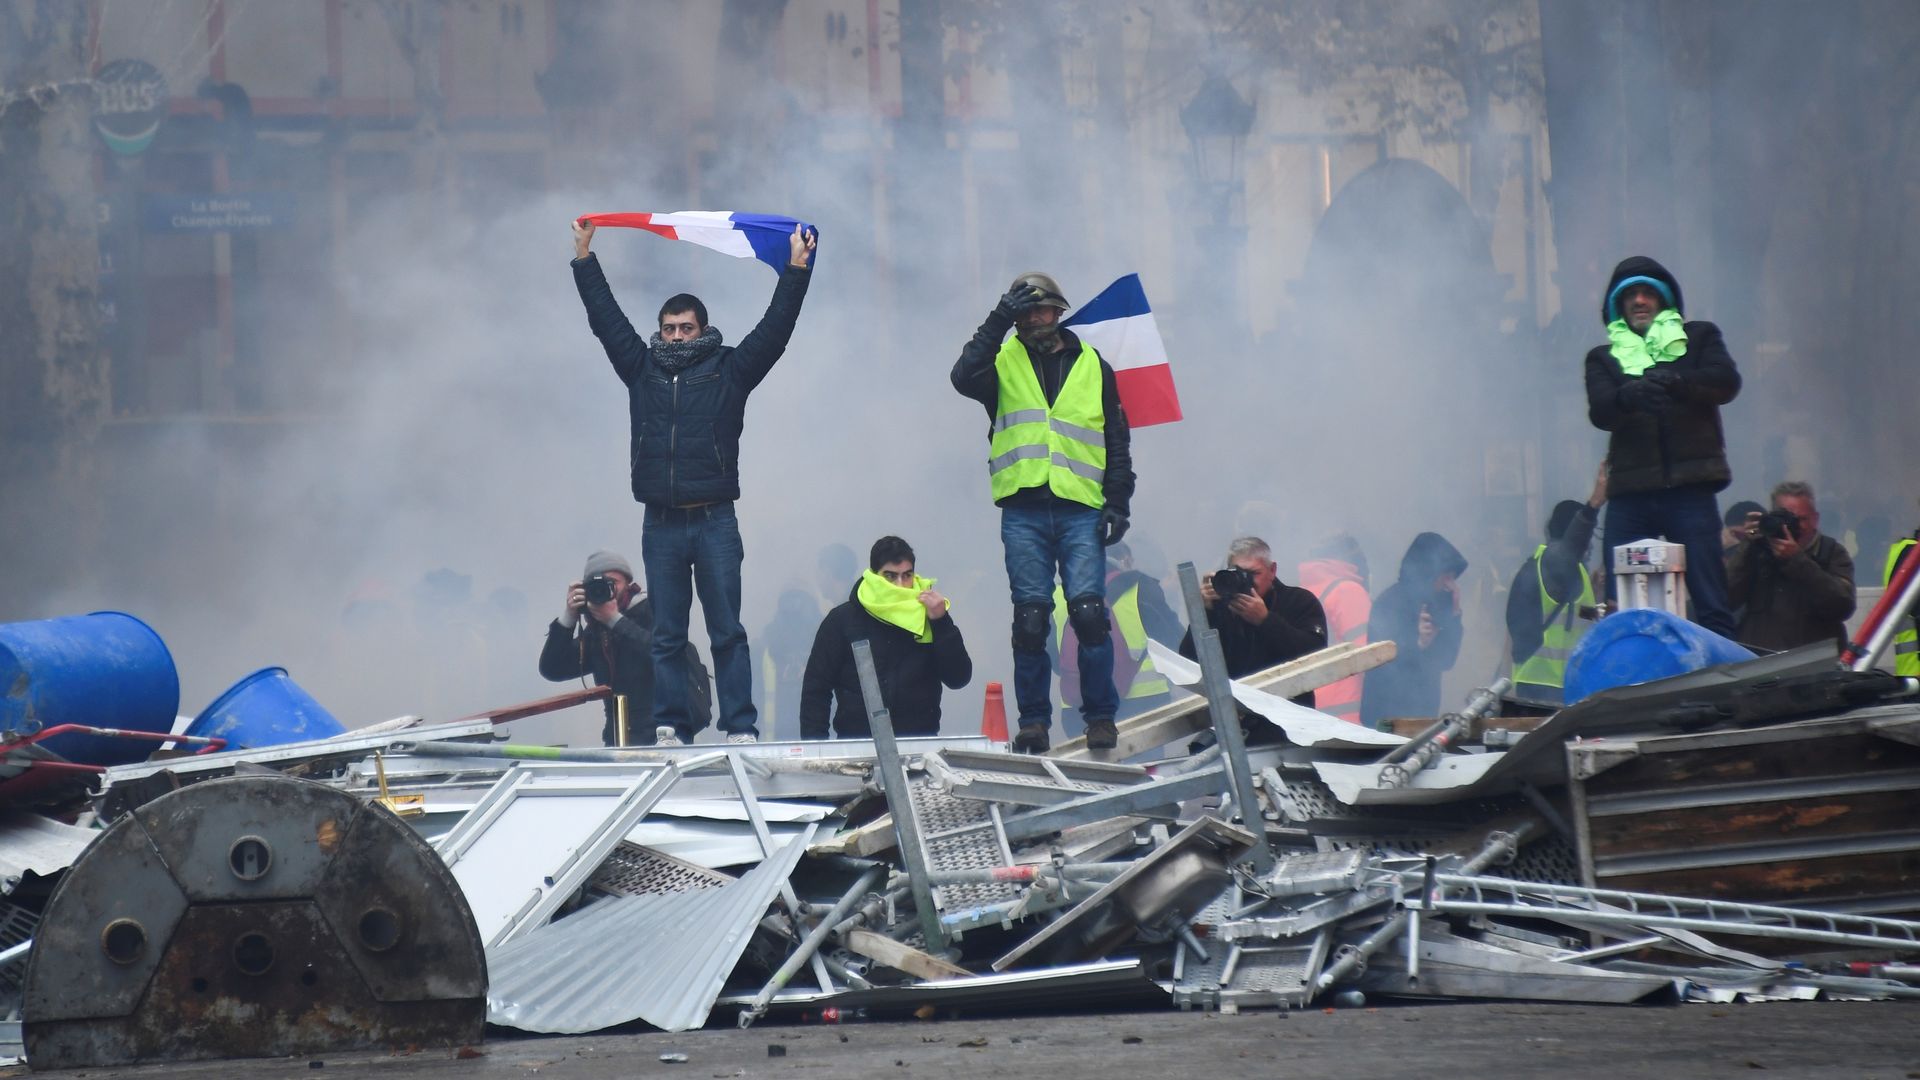 A protestor stands on a pile of debris while holding a French flag over his head.